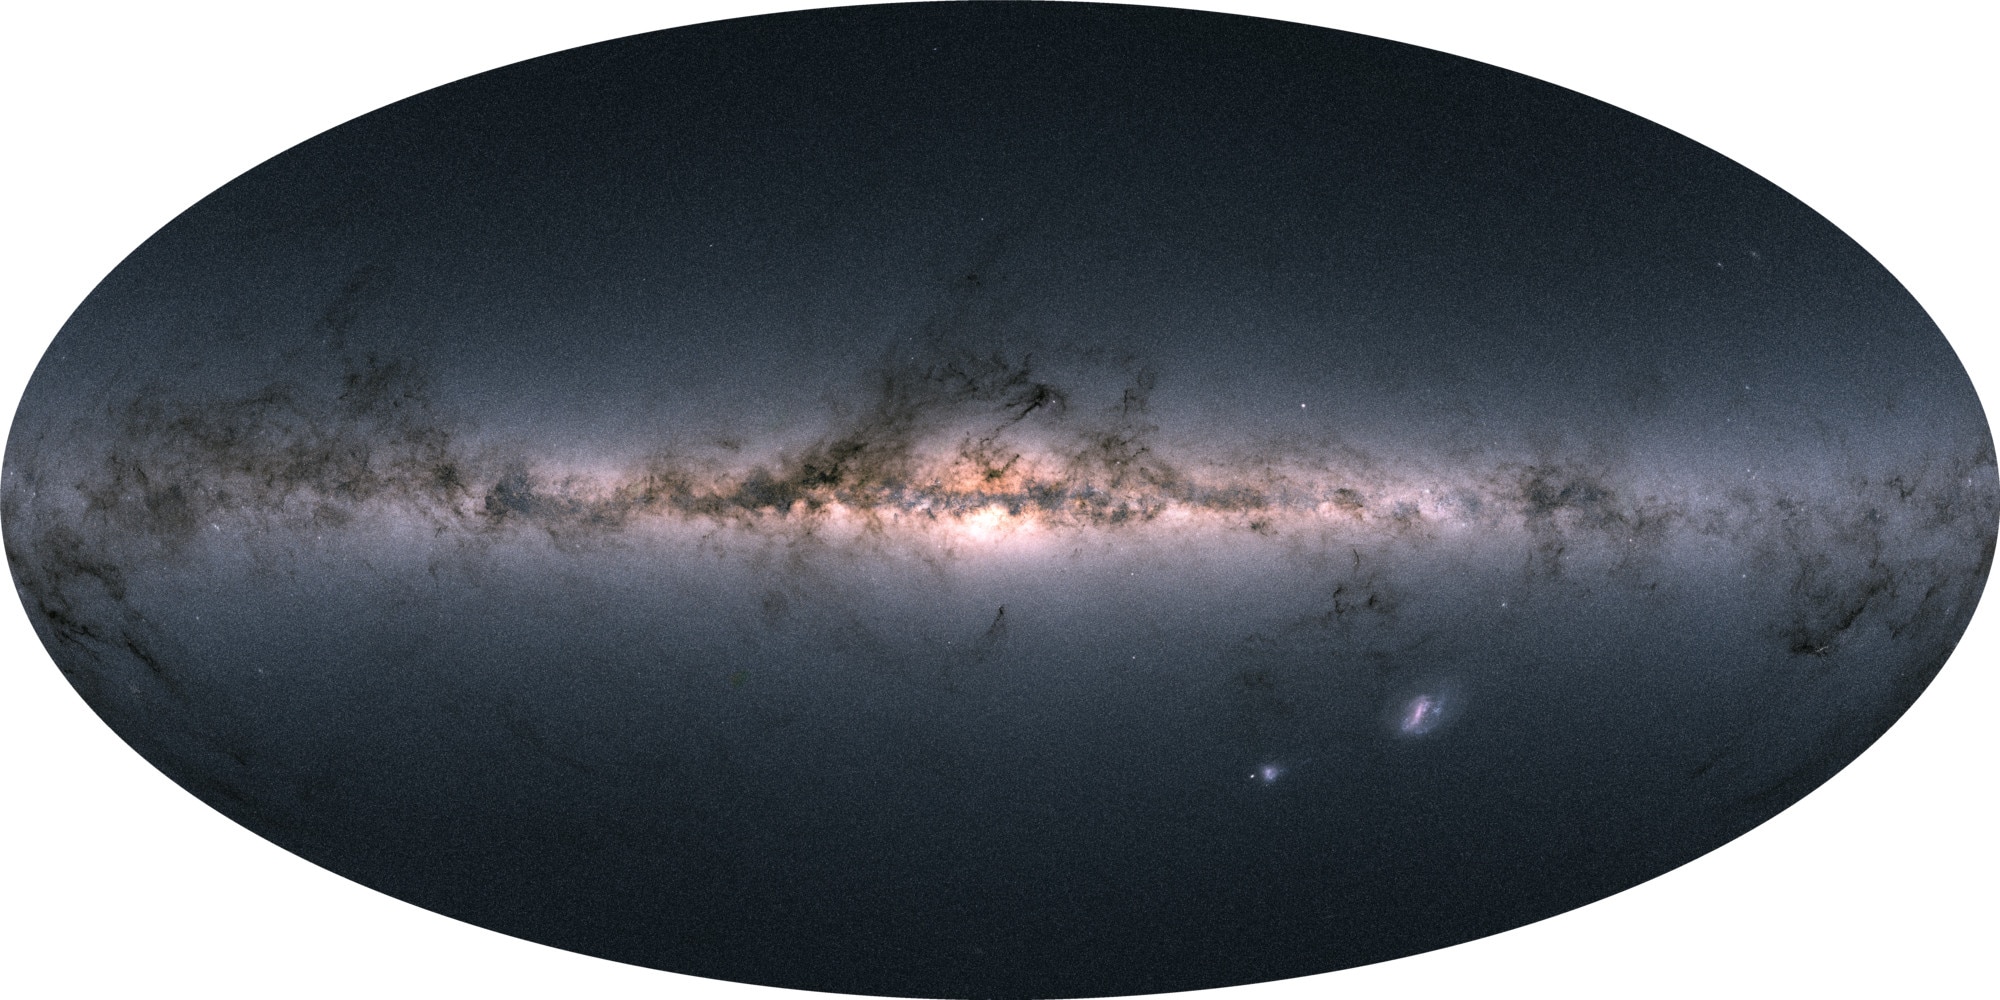 The entire sky — 1.7 billion stars’ worth — mapped by Gaia and displayed using color information also obtained by the satellite. You can see we live in a flat galaxy with a large central bulge, festooned with dark filaments of dust. Credit: Gaia/DPAC/ESA